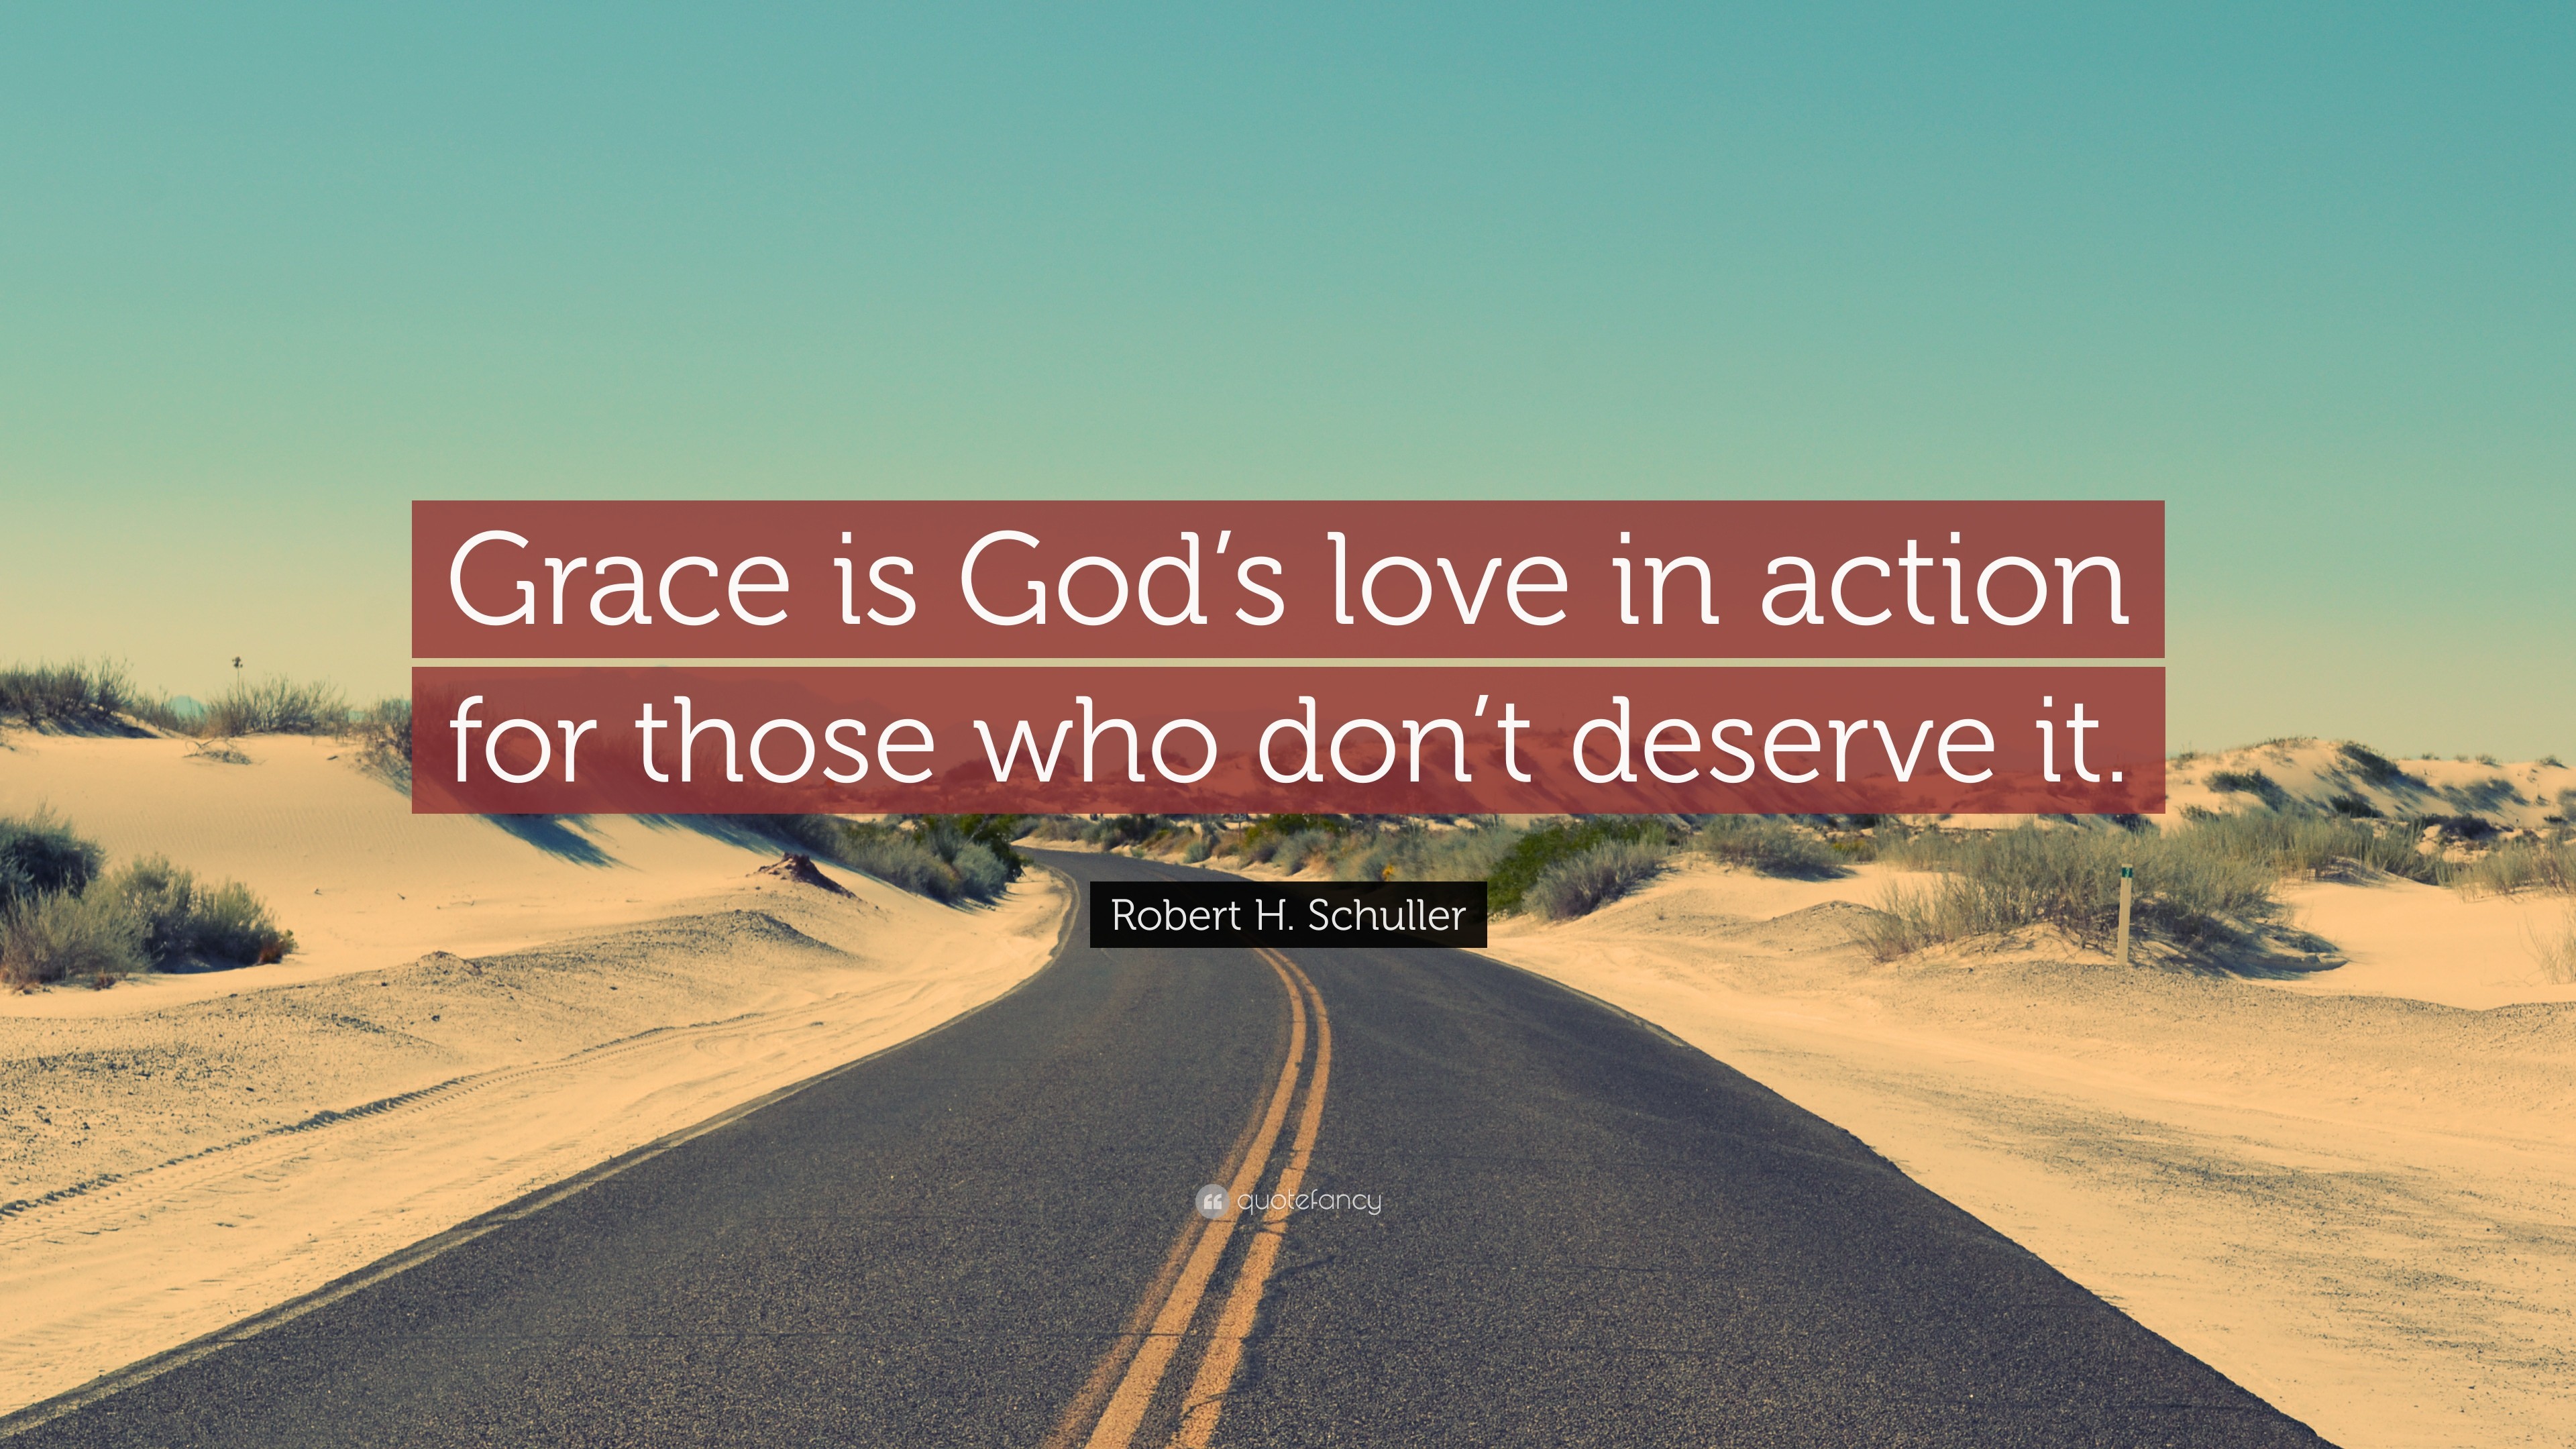 3840x2160 Robert H. Schuller Quote: “Grace is God's love in action for those who